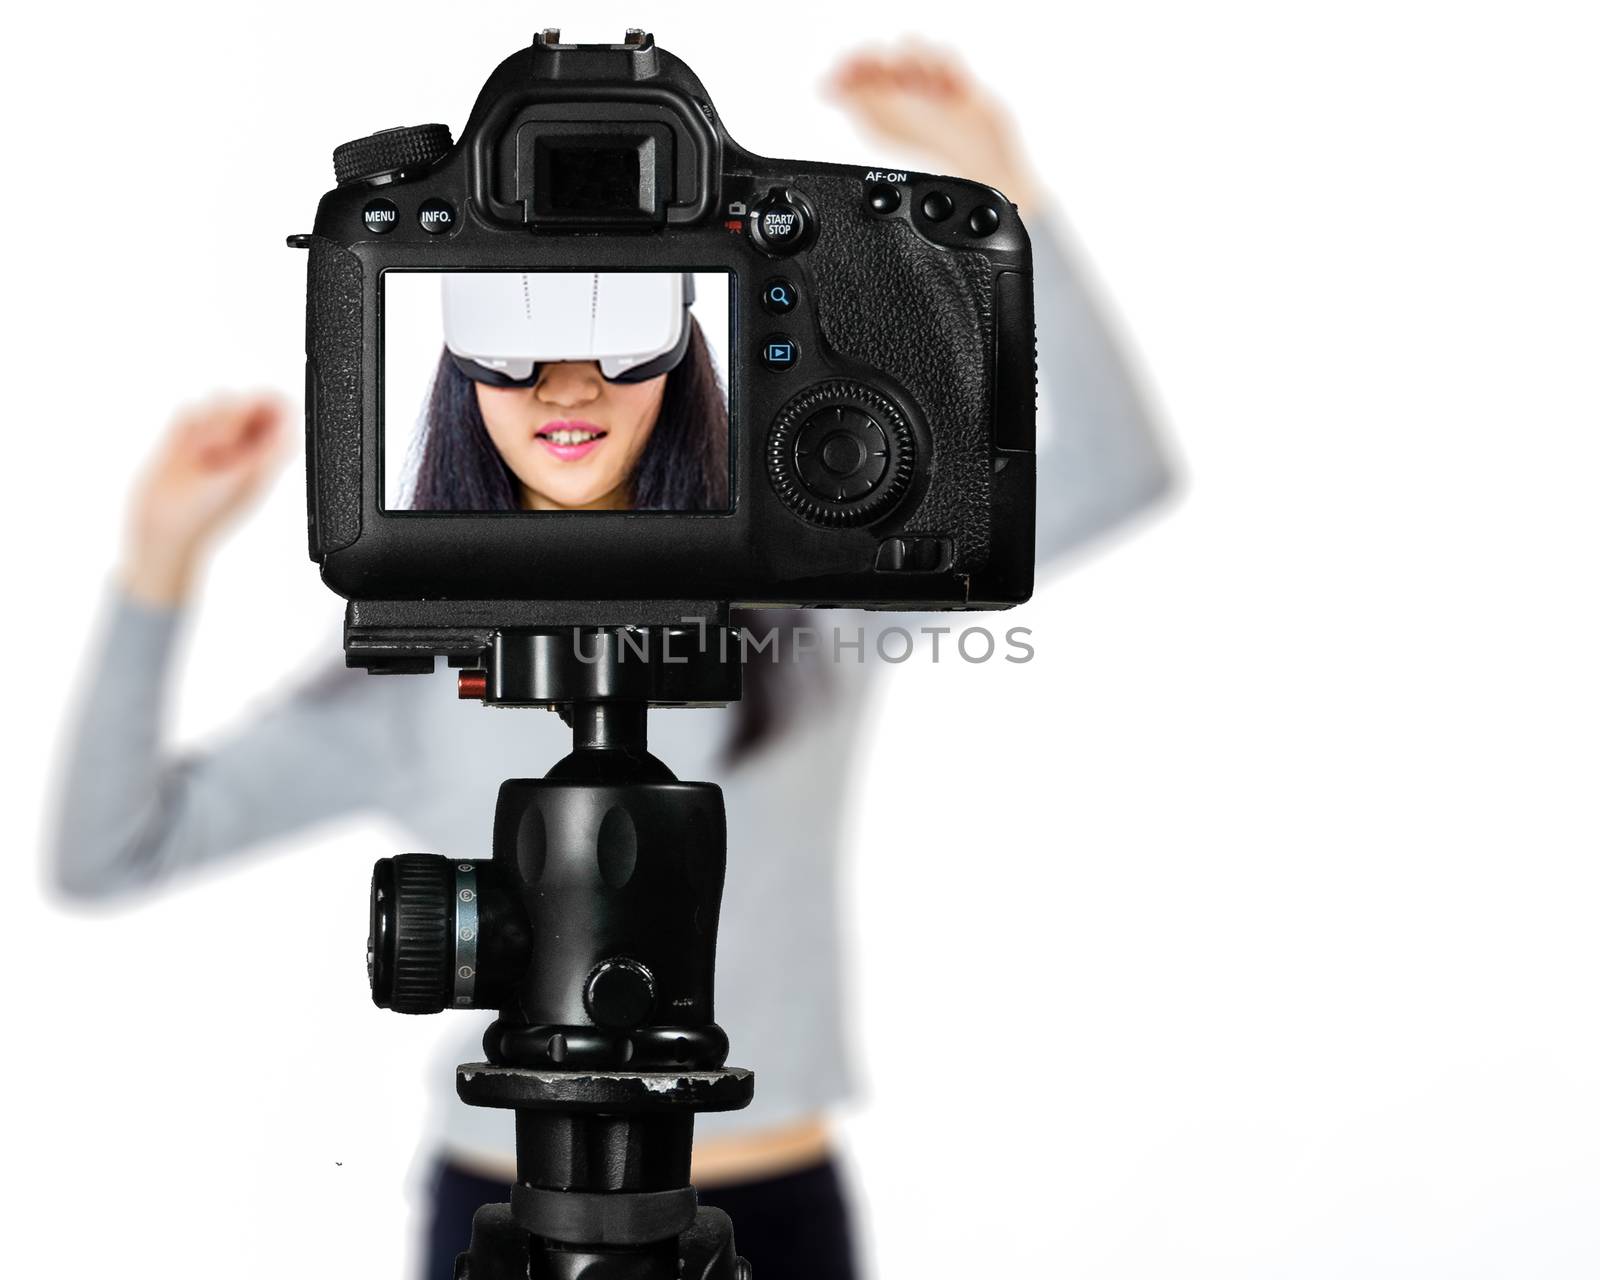 Focus on live view on camera on tripod, teenage girl  using VR goggles image on back screen with blurred scene in background. Teenage vlogger livestreaming show concept